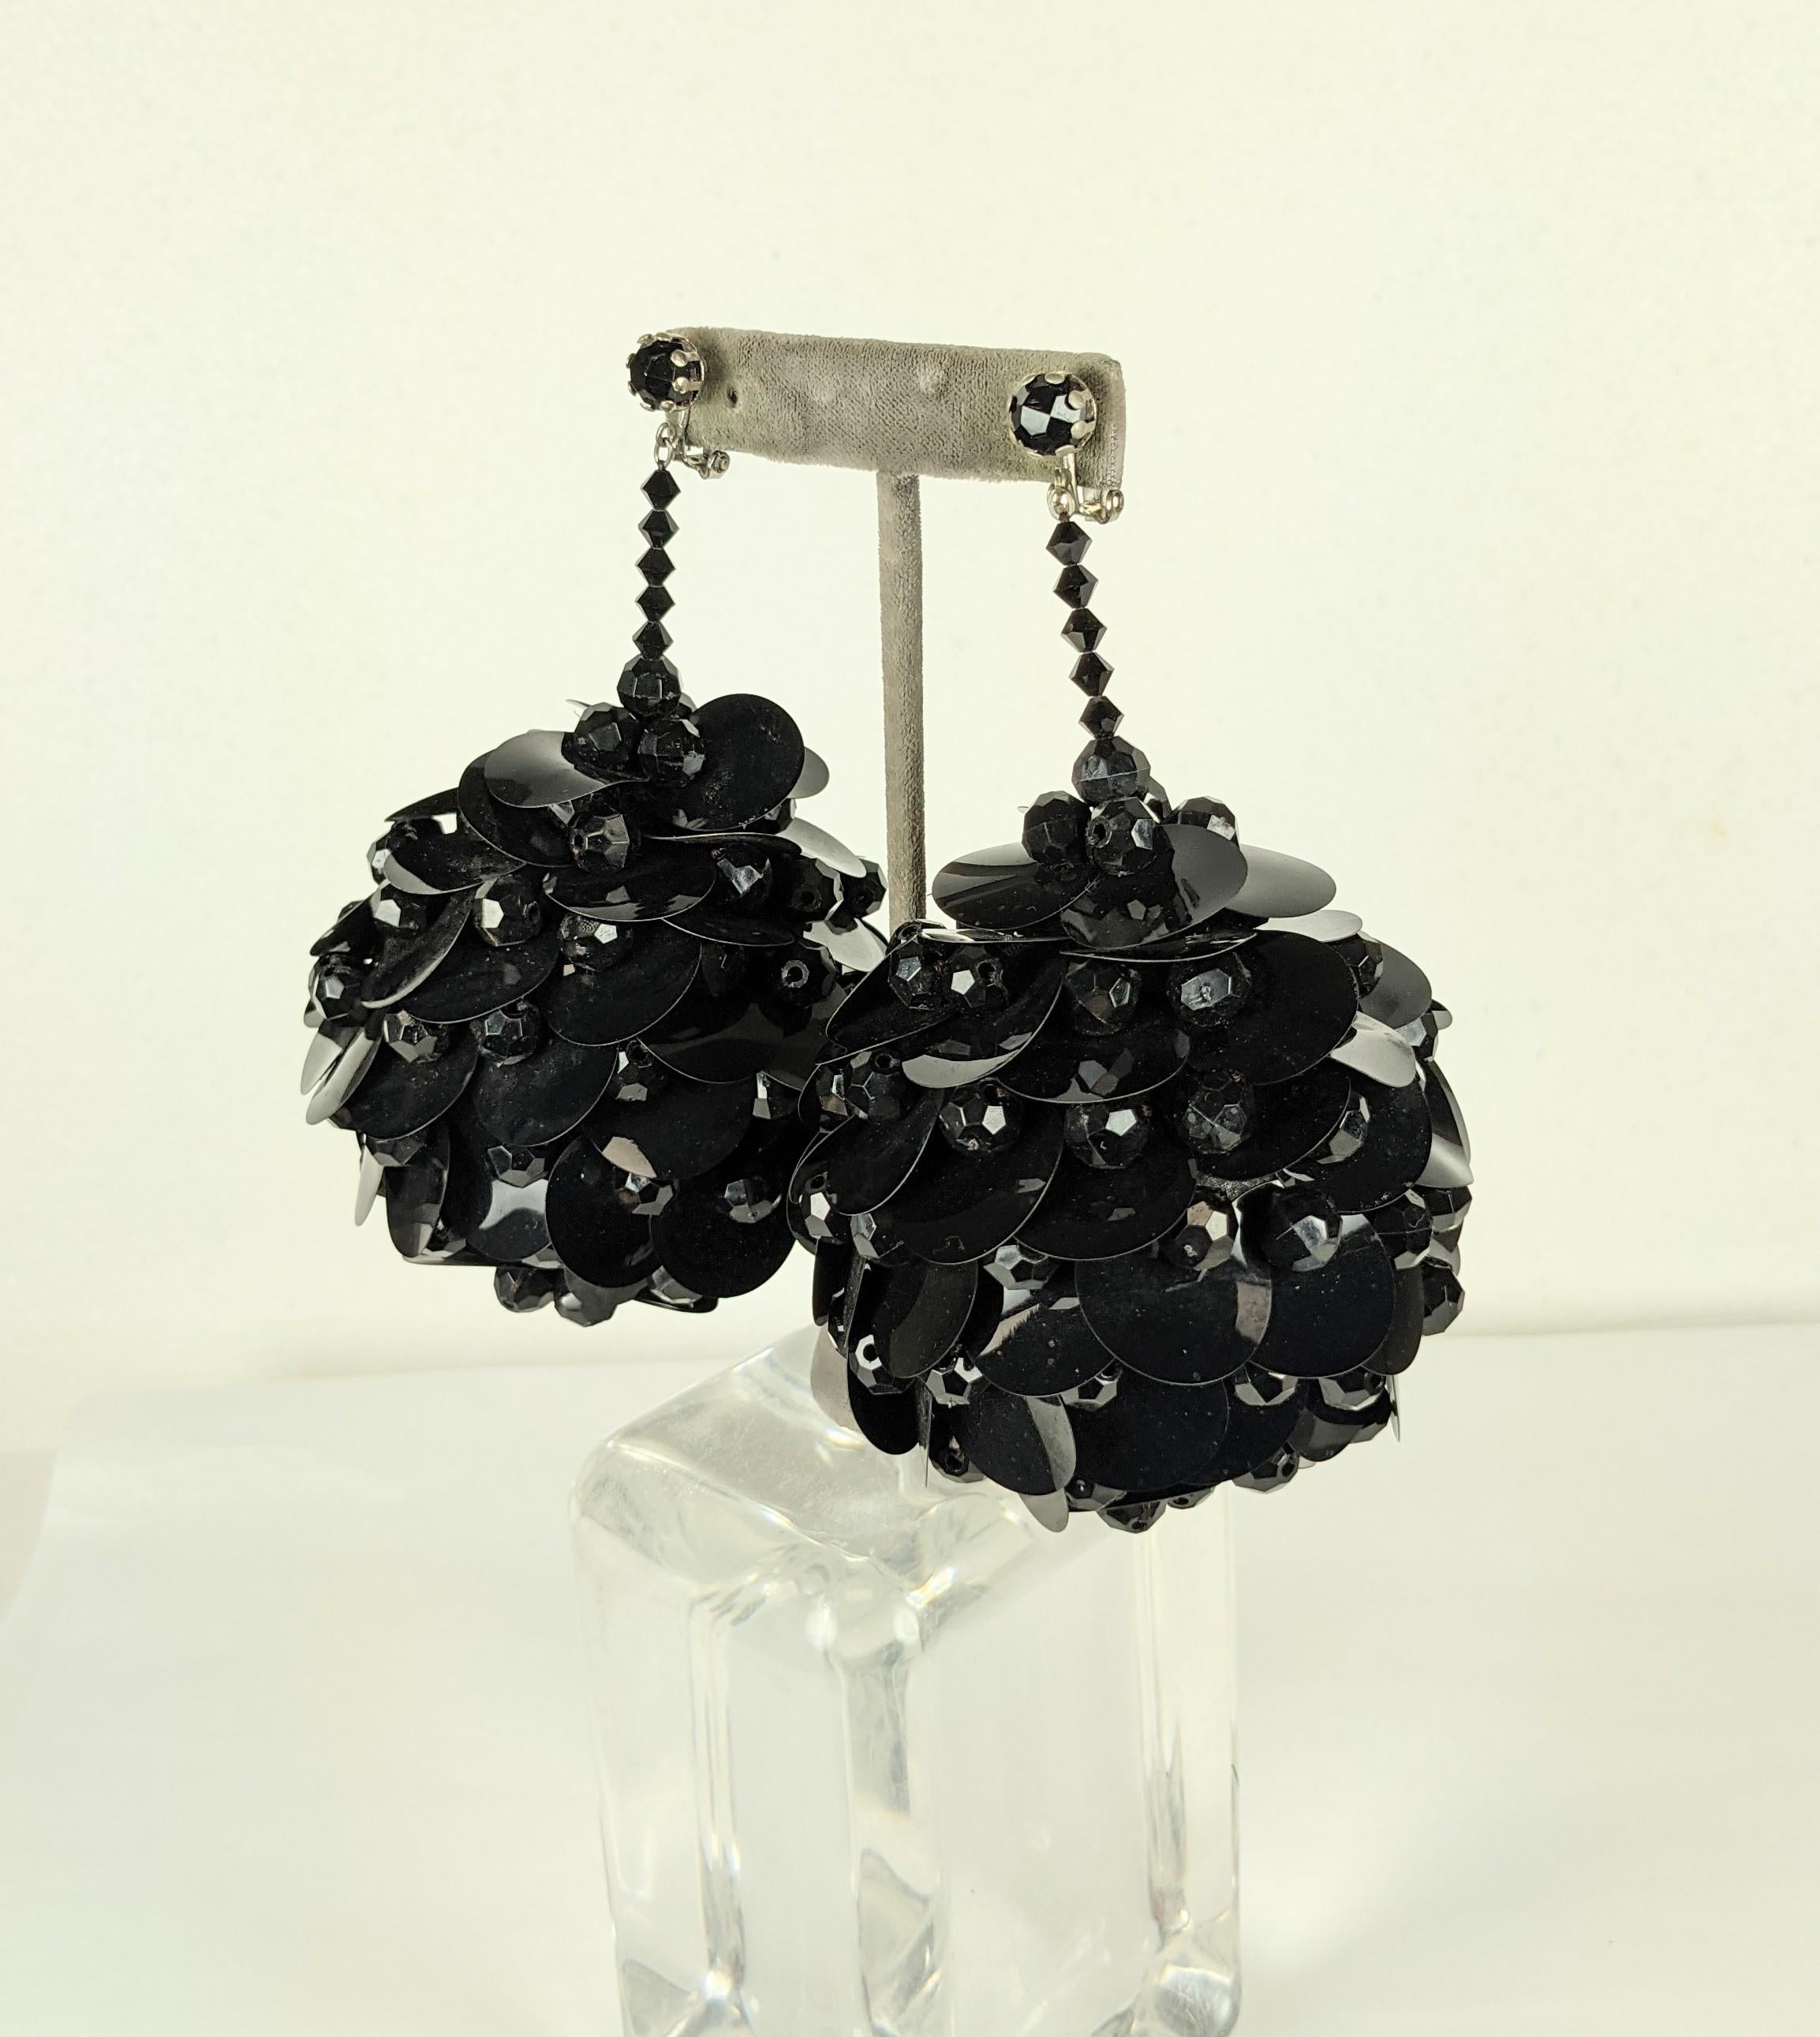 Channel your inner Twiggy with these Massive Mod Sequin Ball Earrings from the 1960's.  Huge spheres are hand sewn with resin jet beads and black circular paillettes resembling round pine cones, likely on a foam base. 
Clip back fittings. Not